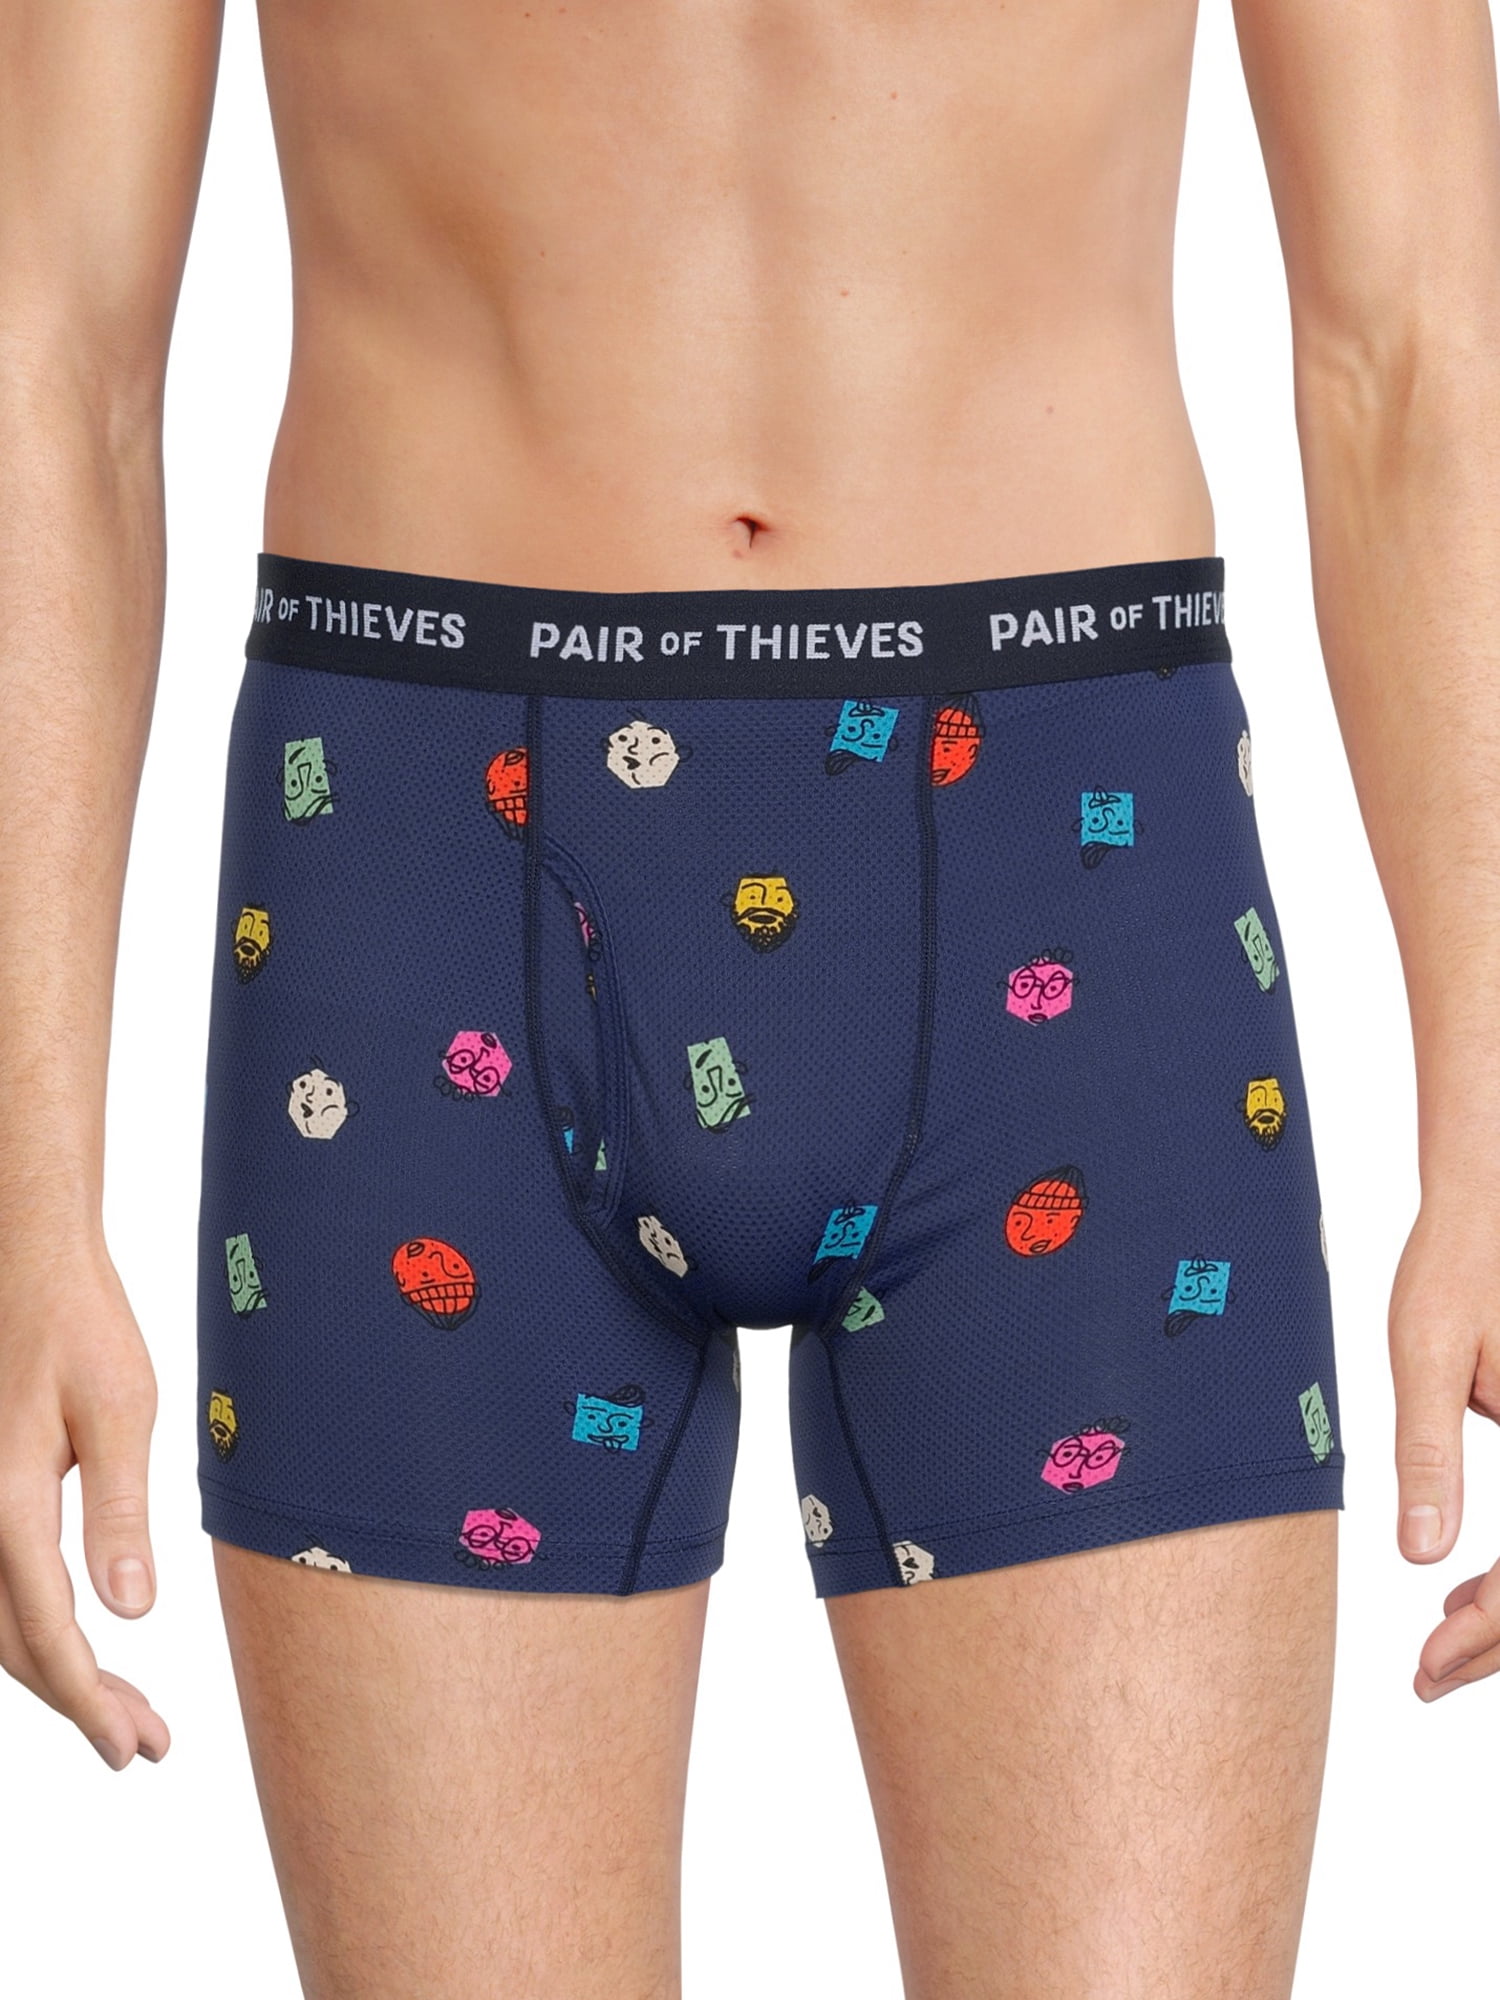 Micro-perforated patterned boxer brief, Pair of Thieves